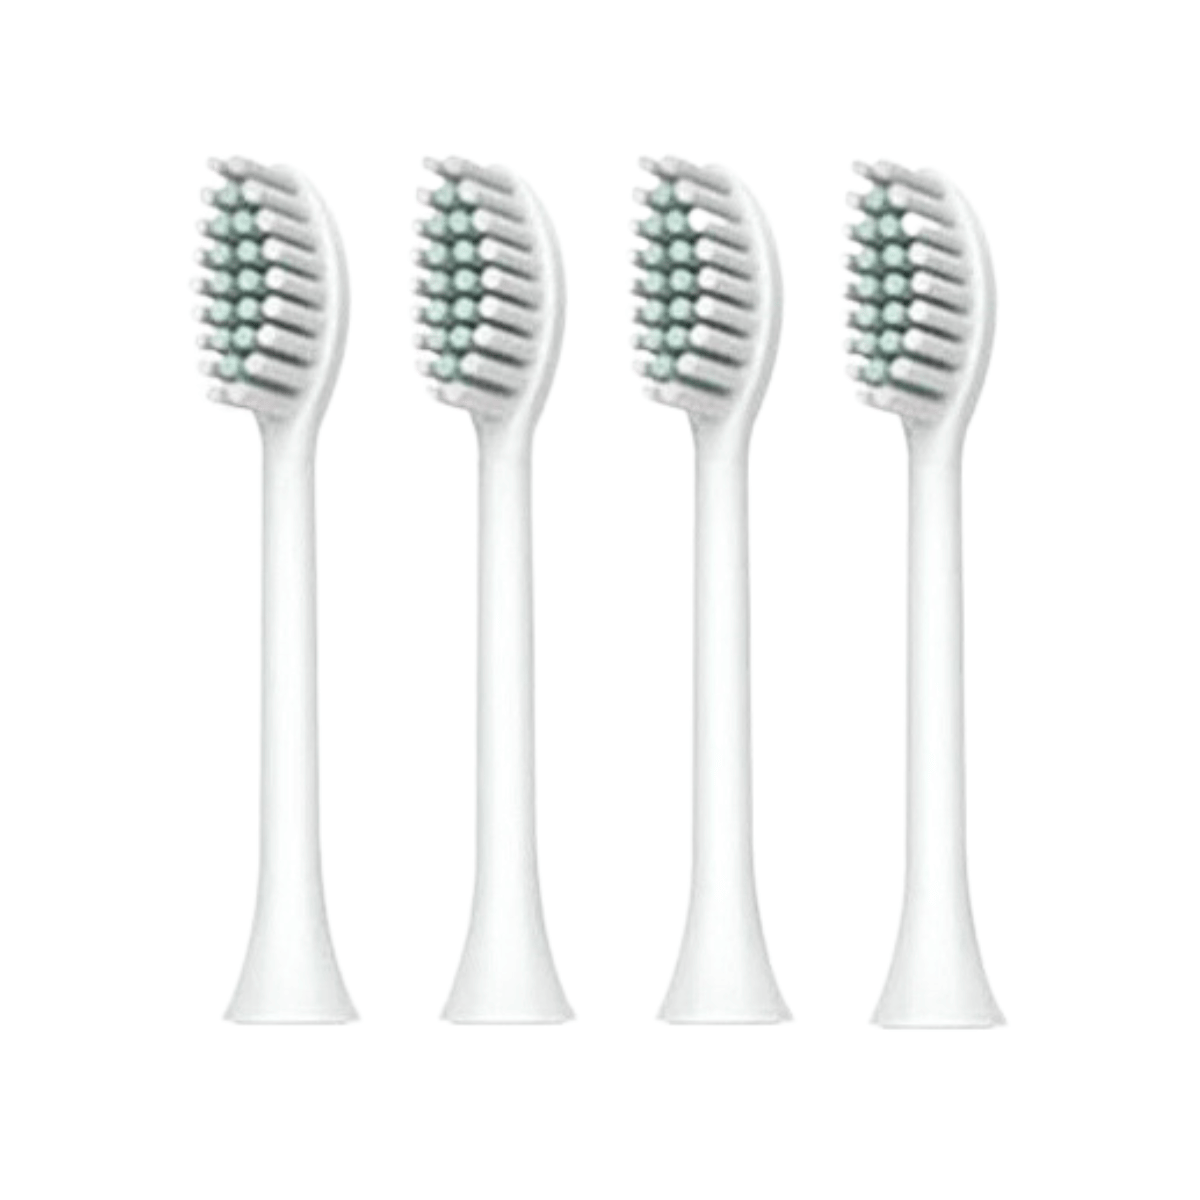 Attachment Heads (For Electric Toothbrush)